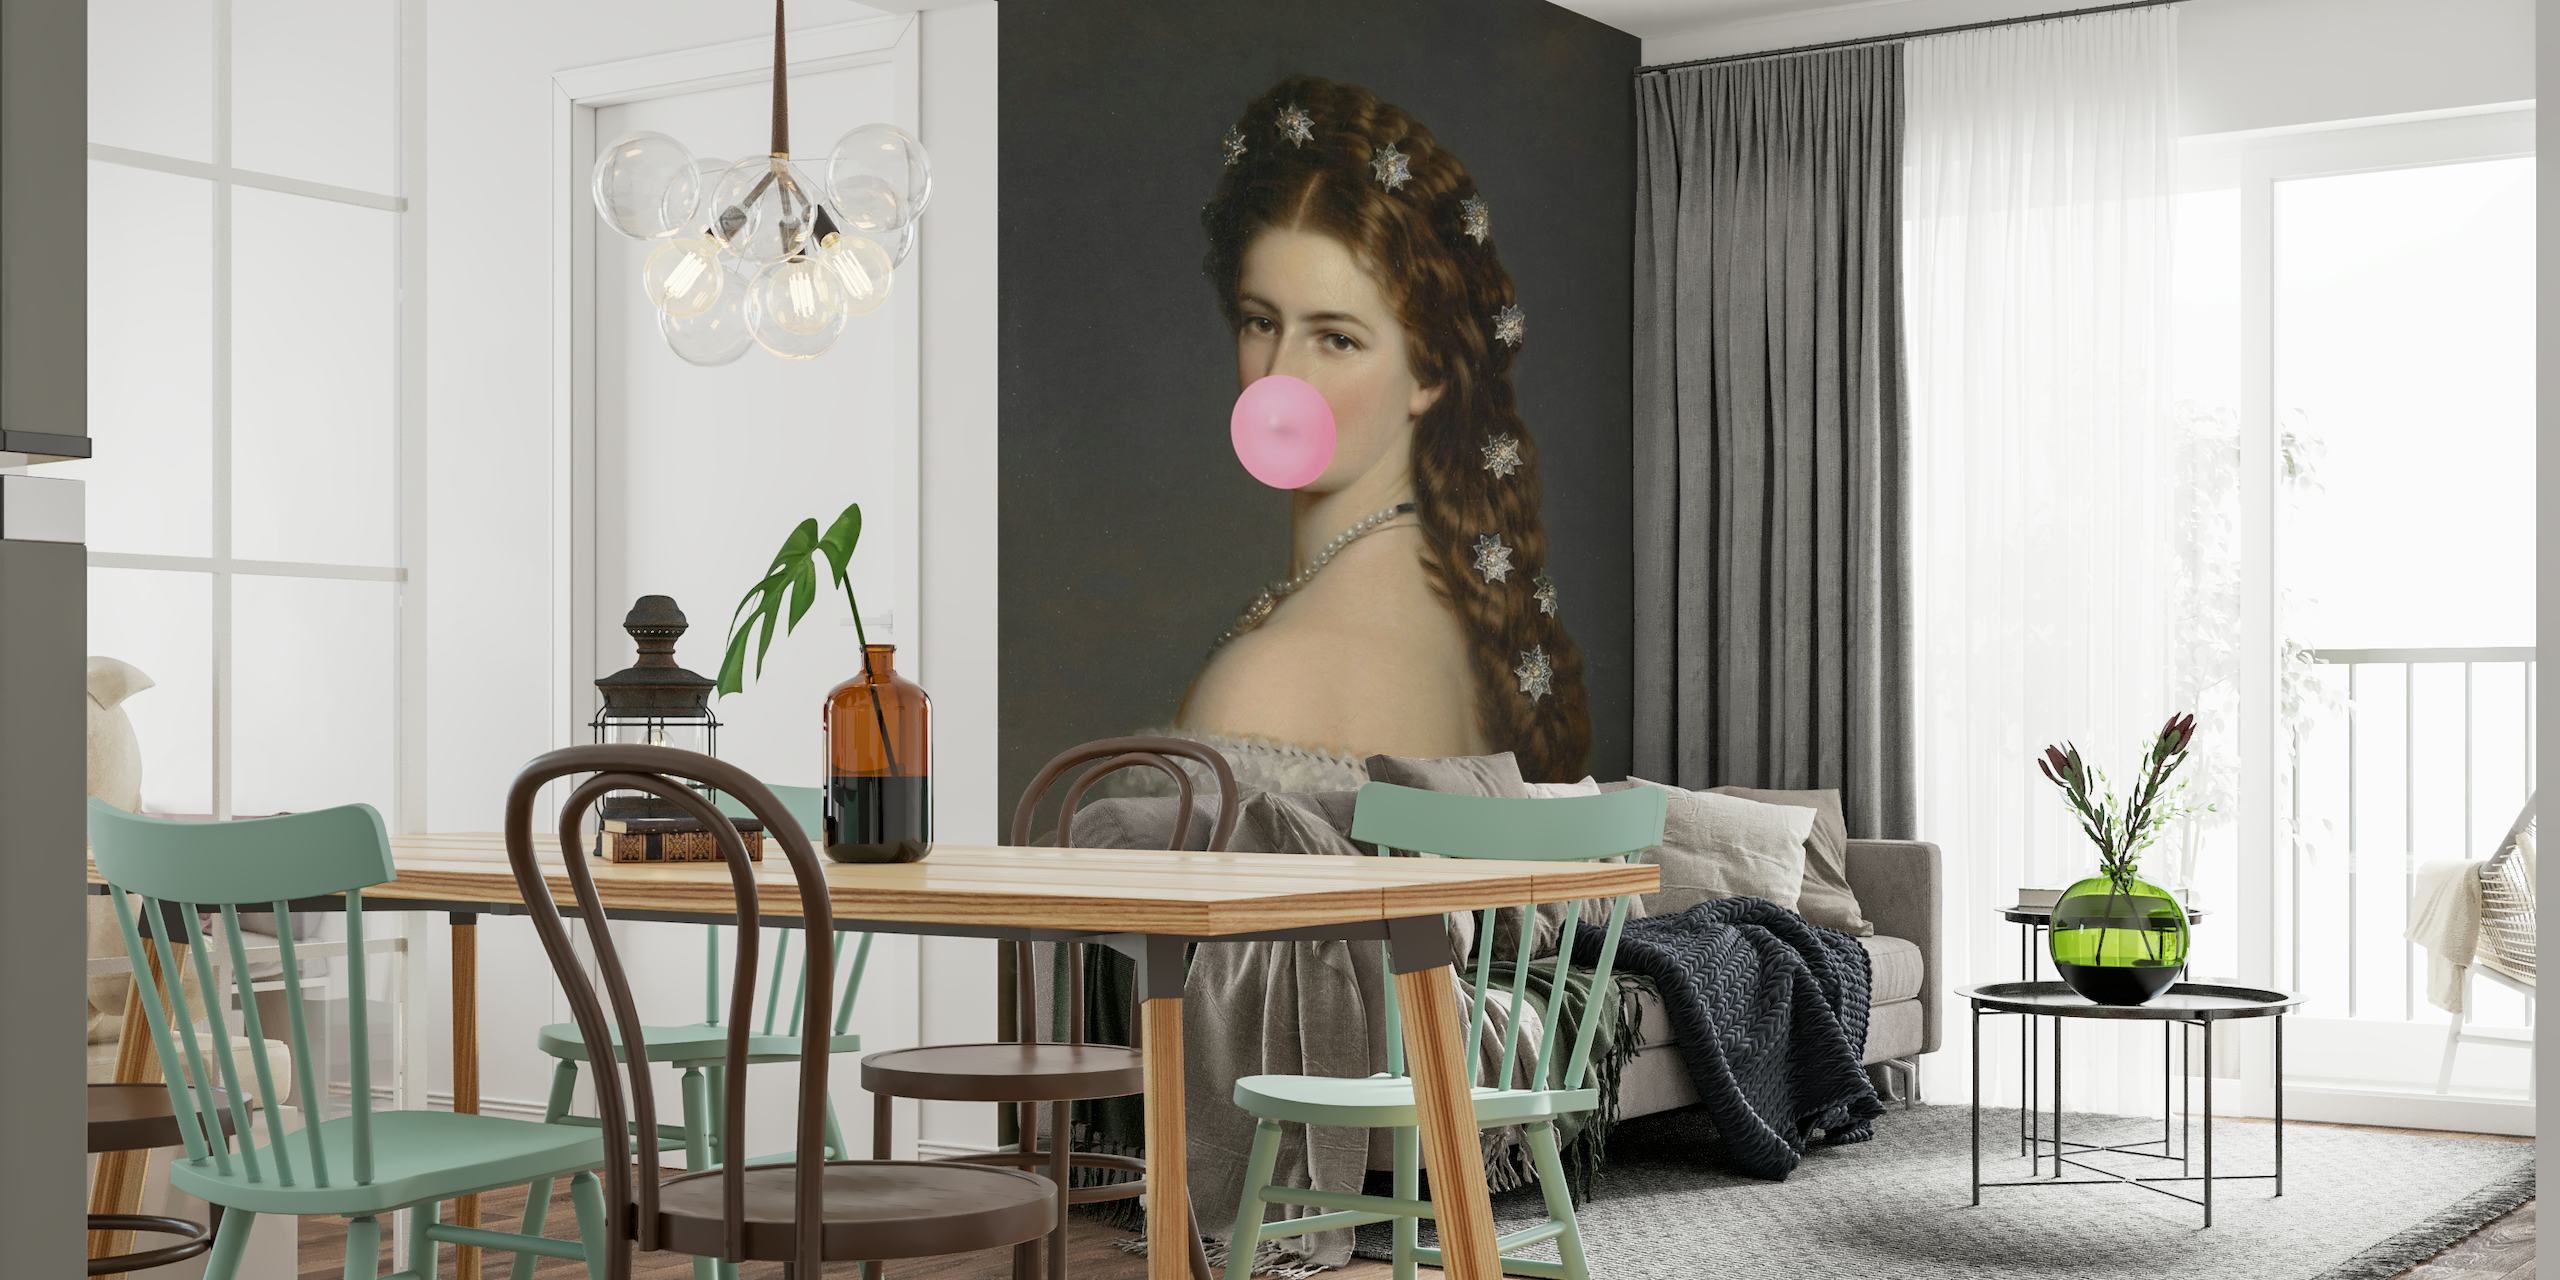 Wall mural of Empress Sisi blowing a bubble-gum bubble, classic meets quirky design